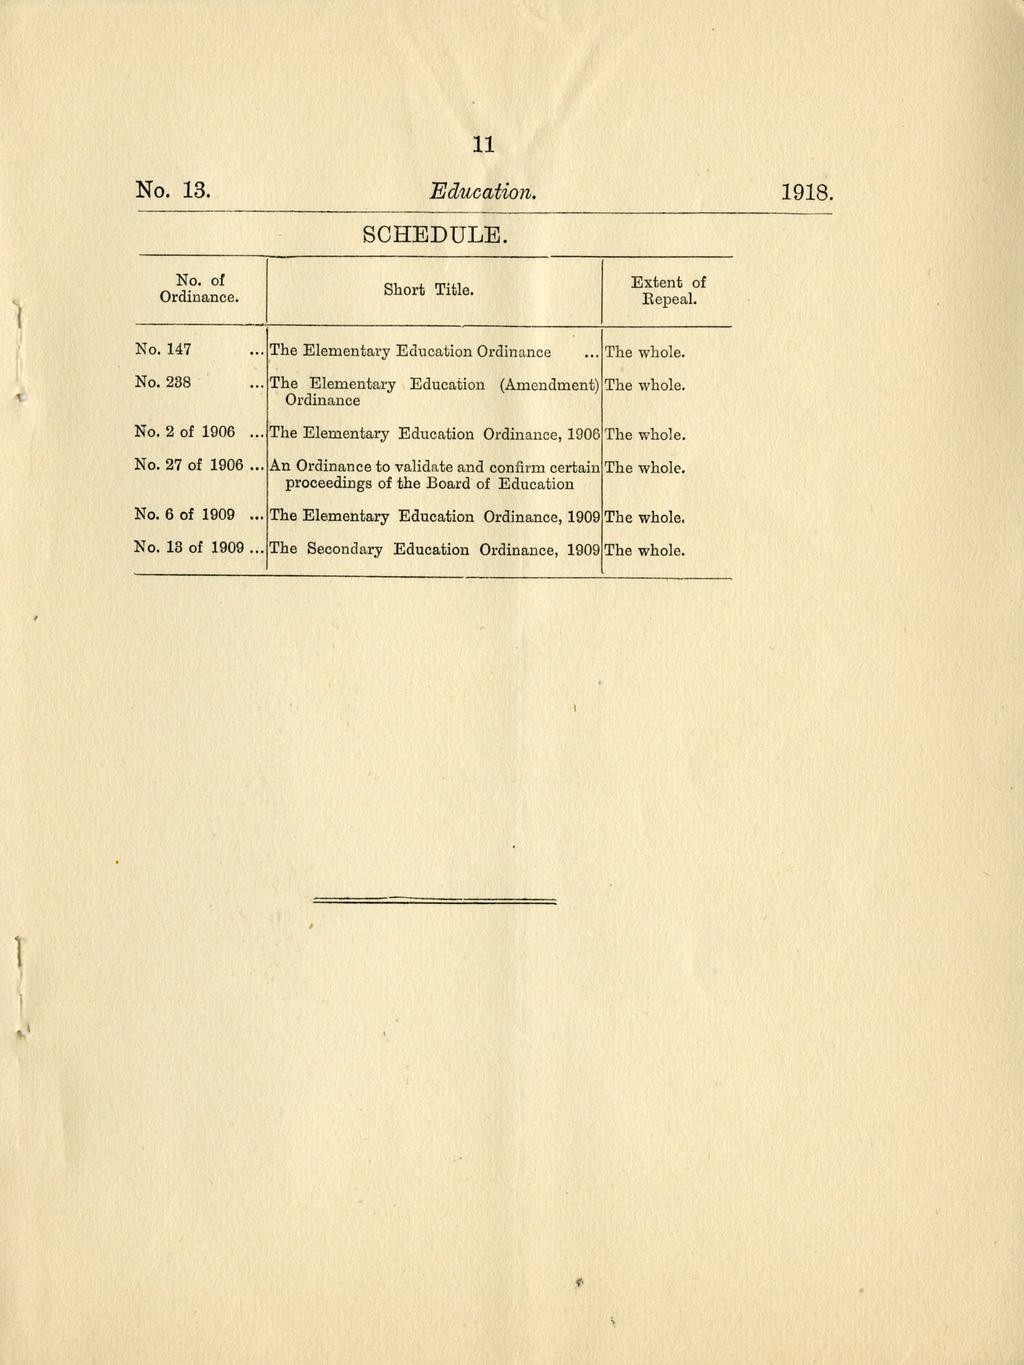 11 SCHEDULE. No. of Ordinance. Short Title. Extent of Repeal. No. 147. The Elementary Education Ordinance... The whole. No. 238 No. 2 of 1906. The Elementary Education (Amendment) The whole.